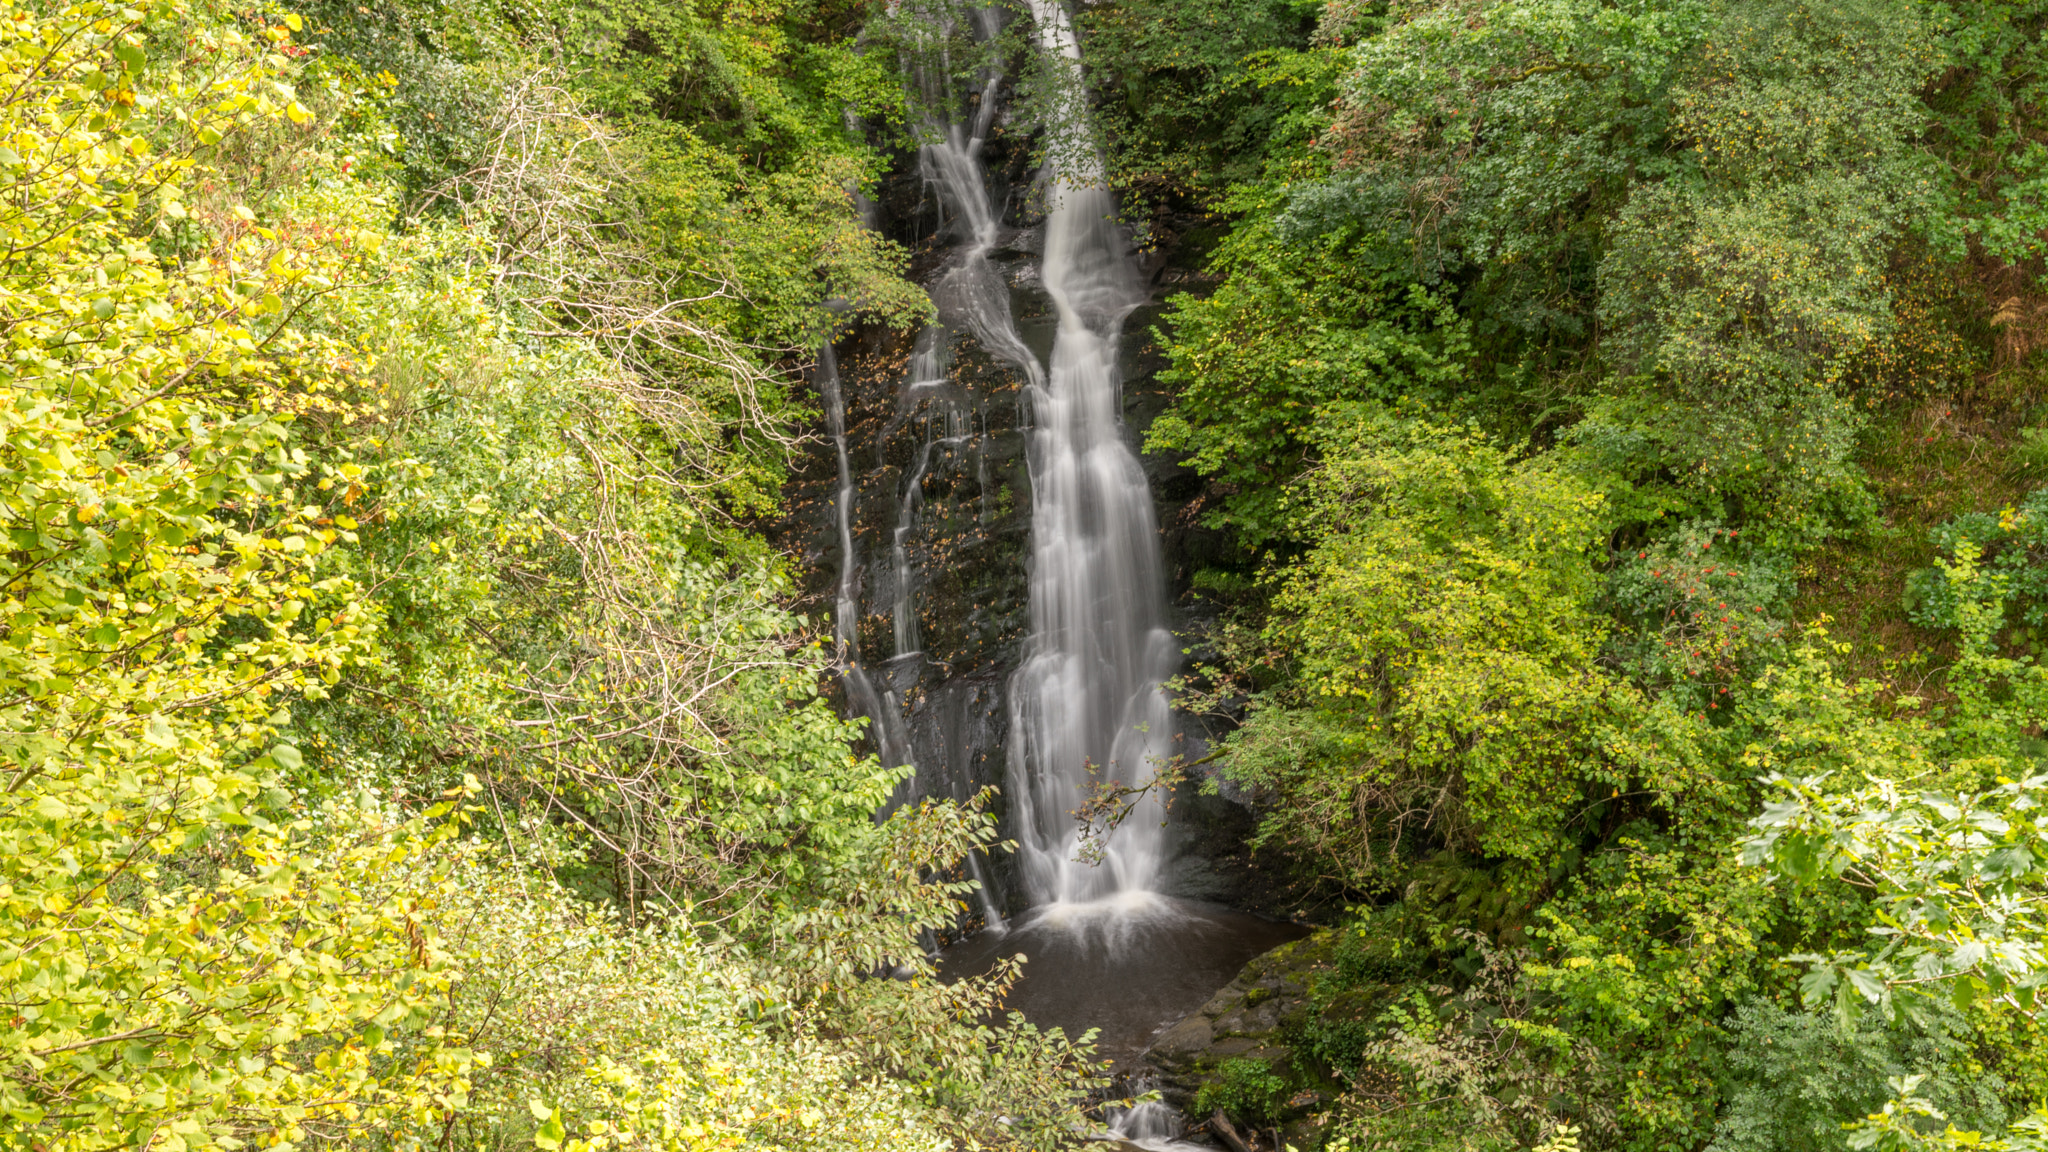 Sony a7 sample photo. Pitlochry black spout waterfall 2 photography